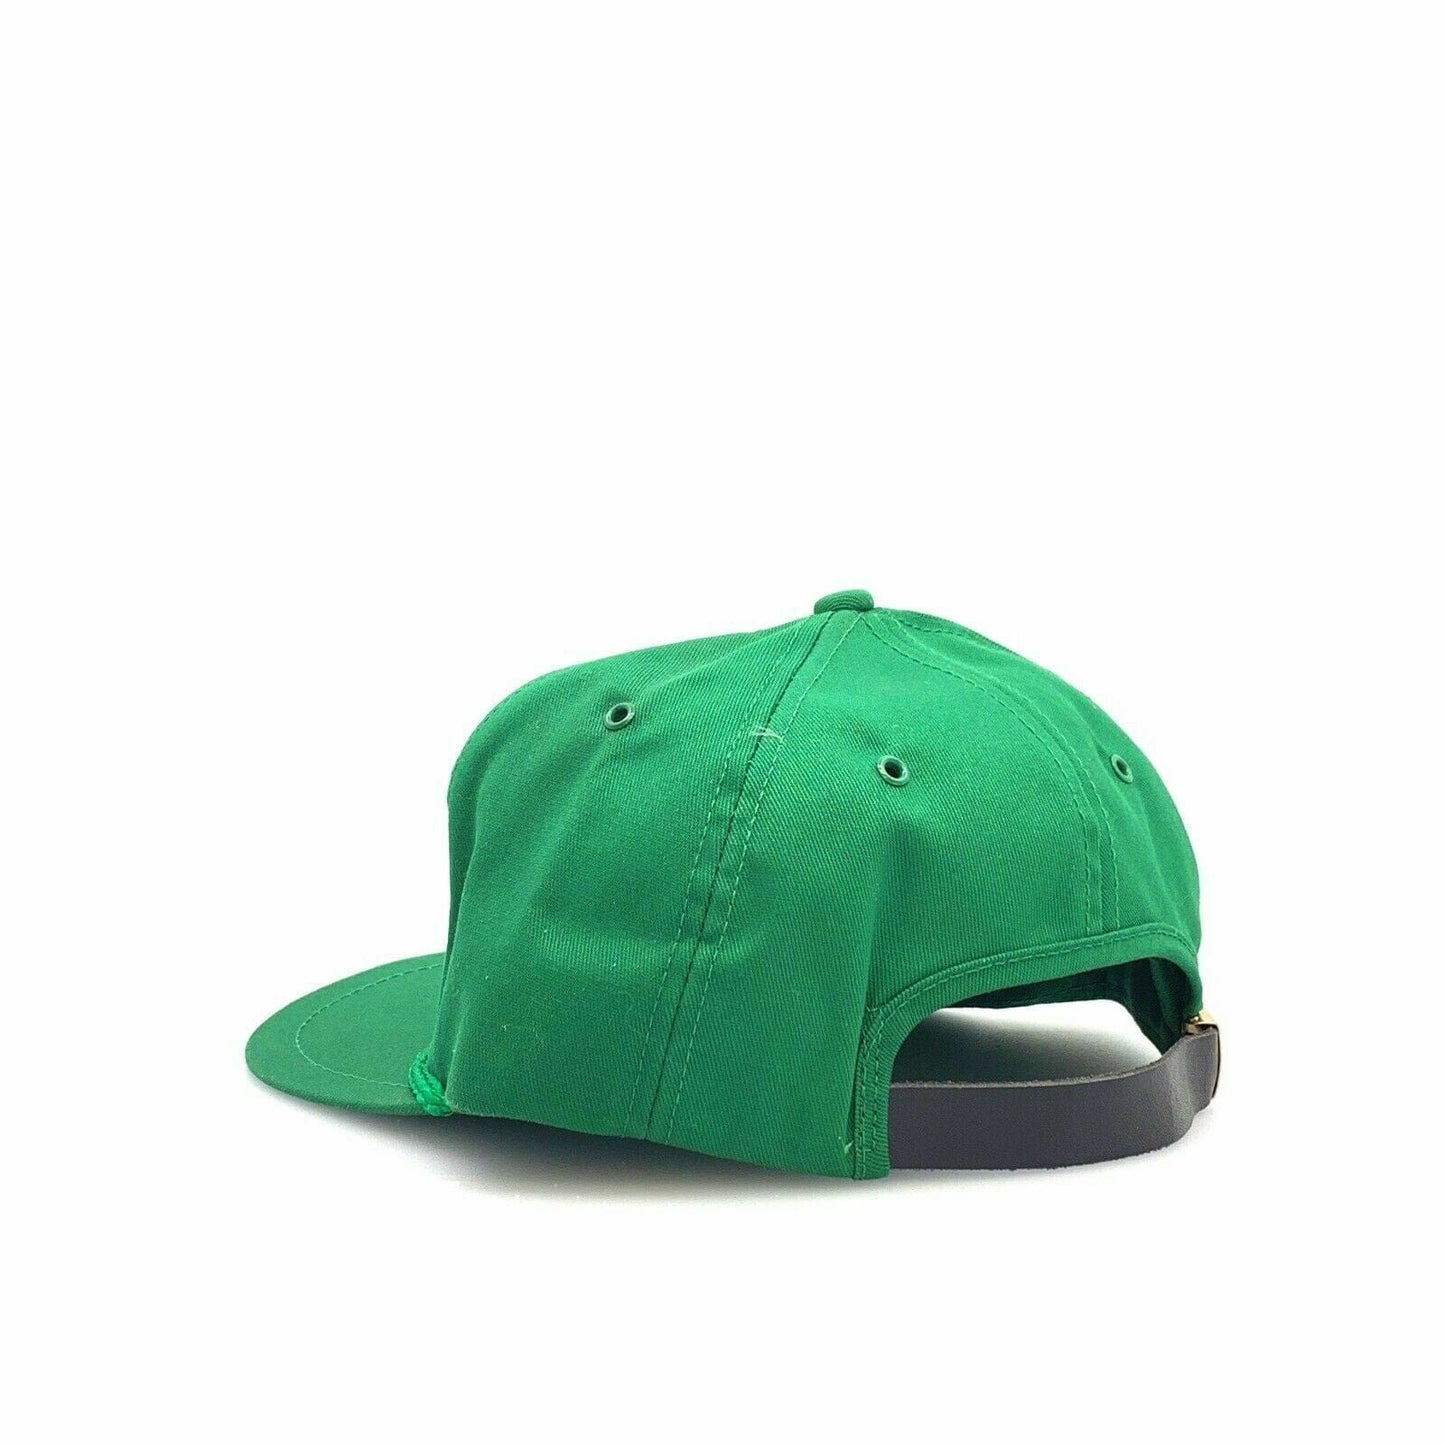 Vintage PIONEER SEED Hat Green K Products 5 Panel Rope Clasp Cap OSFM - parsimonyshoppes